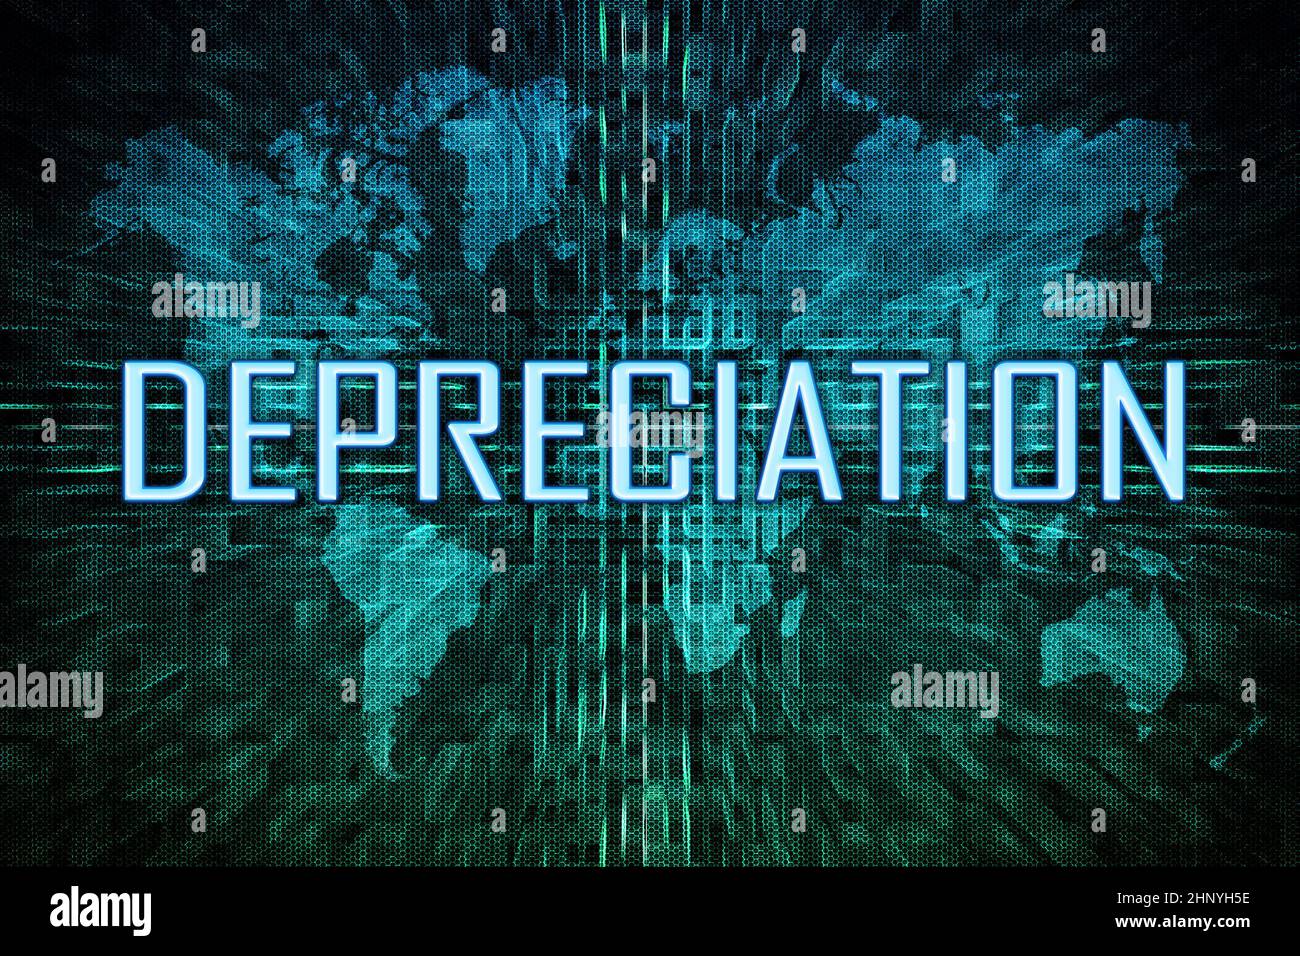 Depreciation - text concept on green digital world map background. Stock Photo